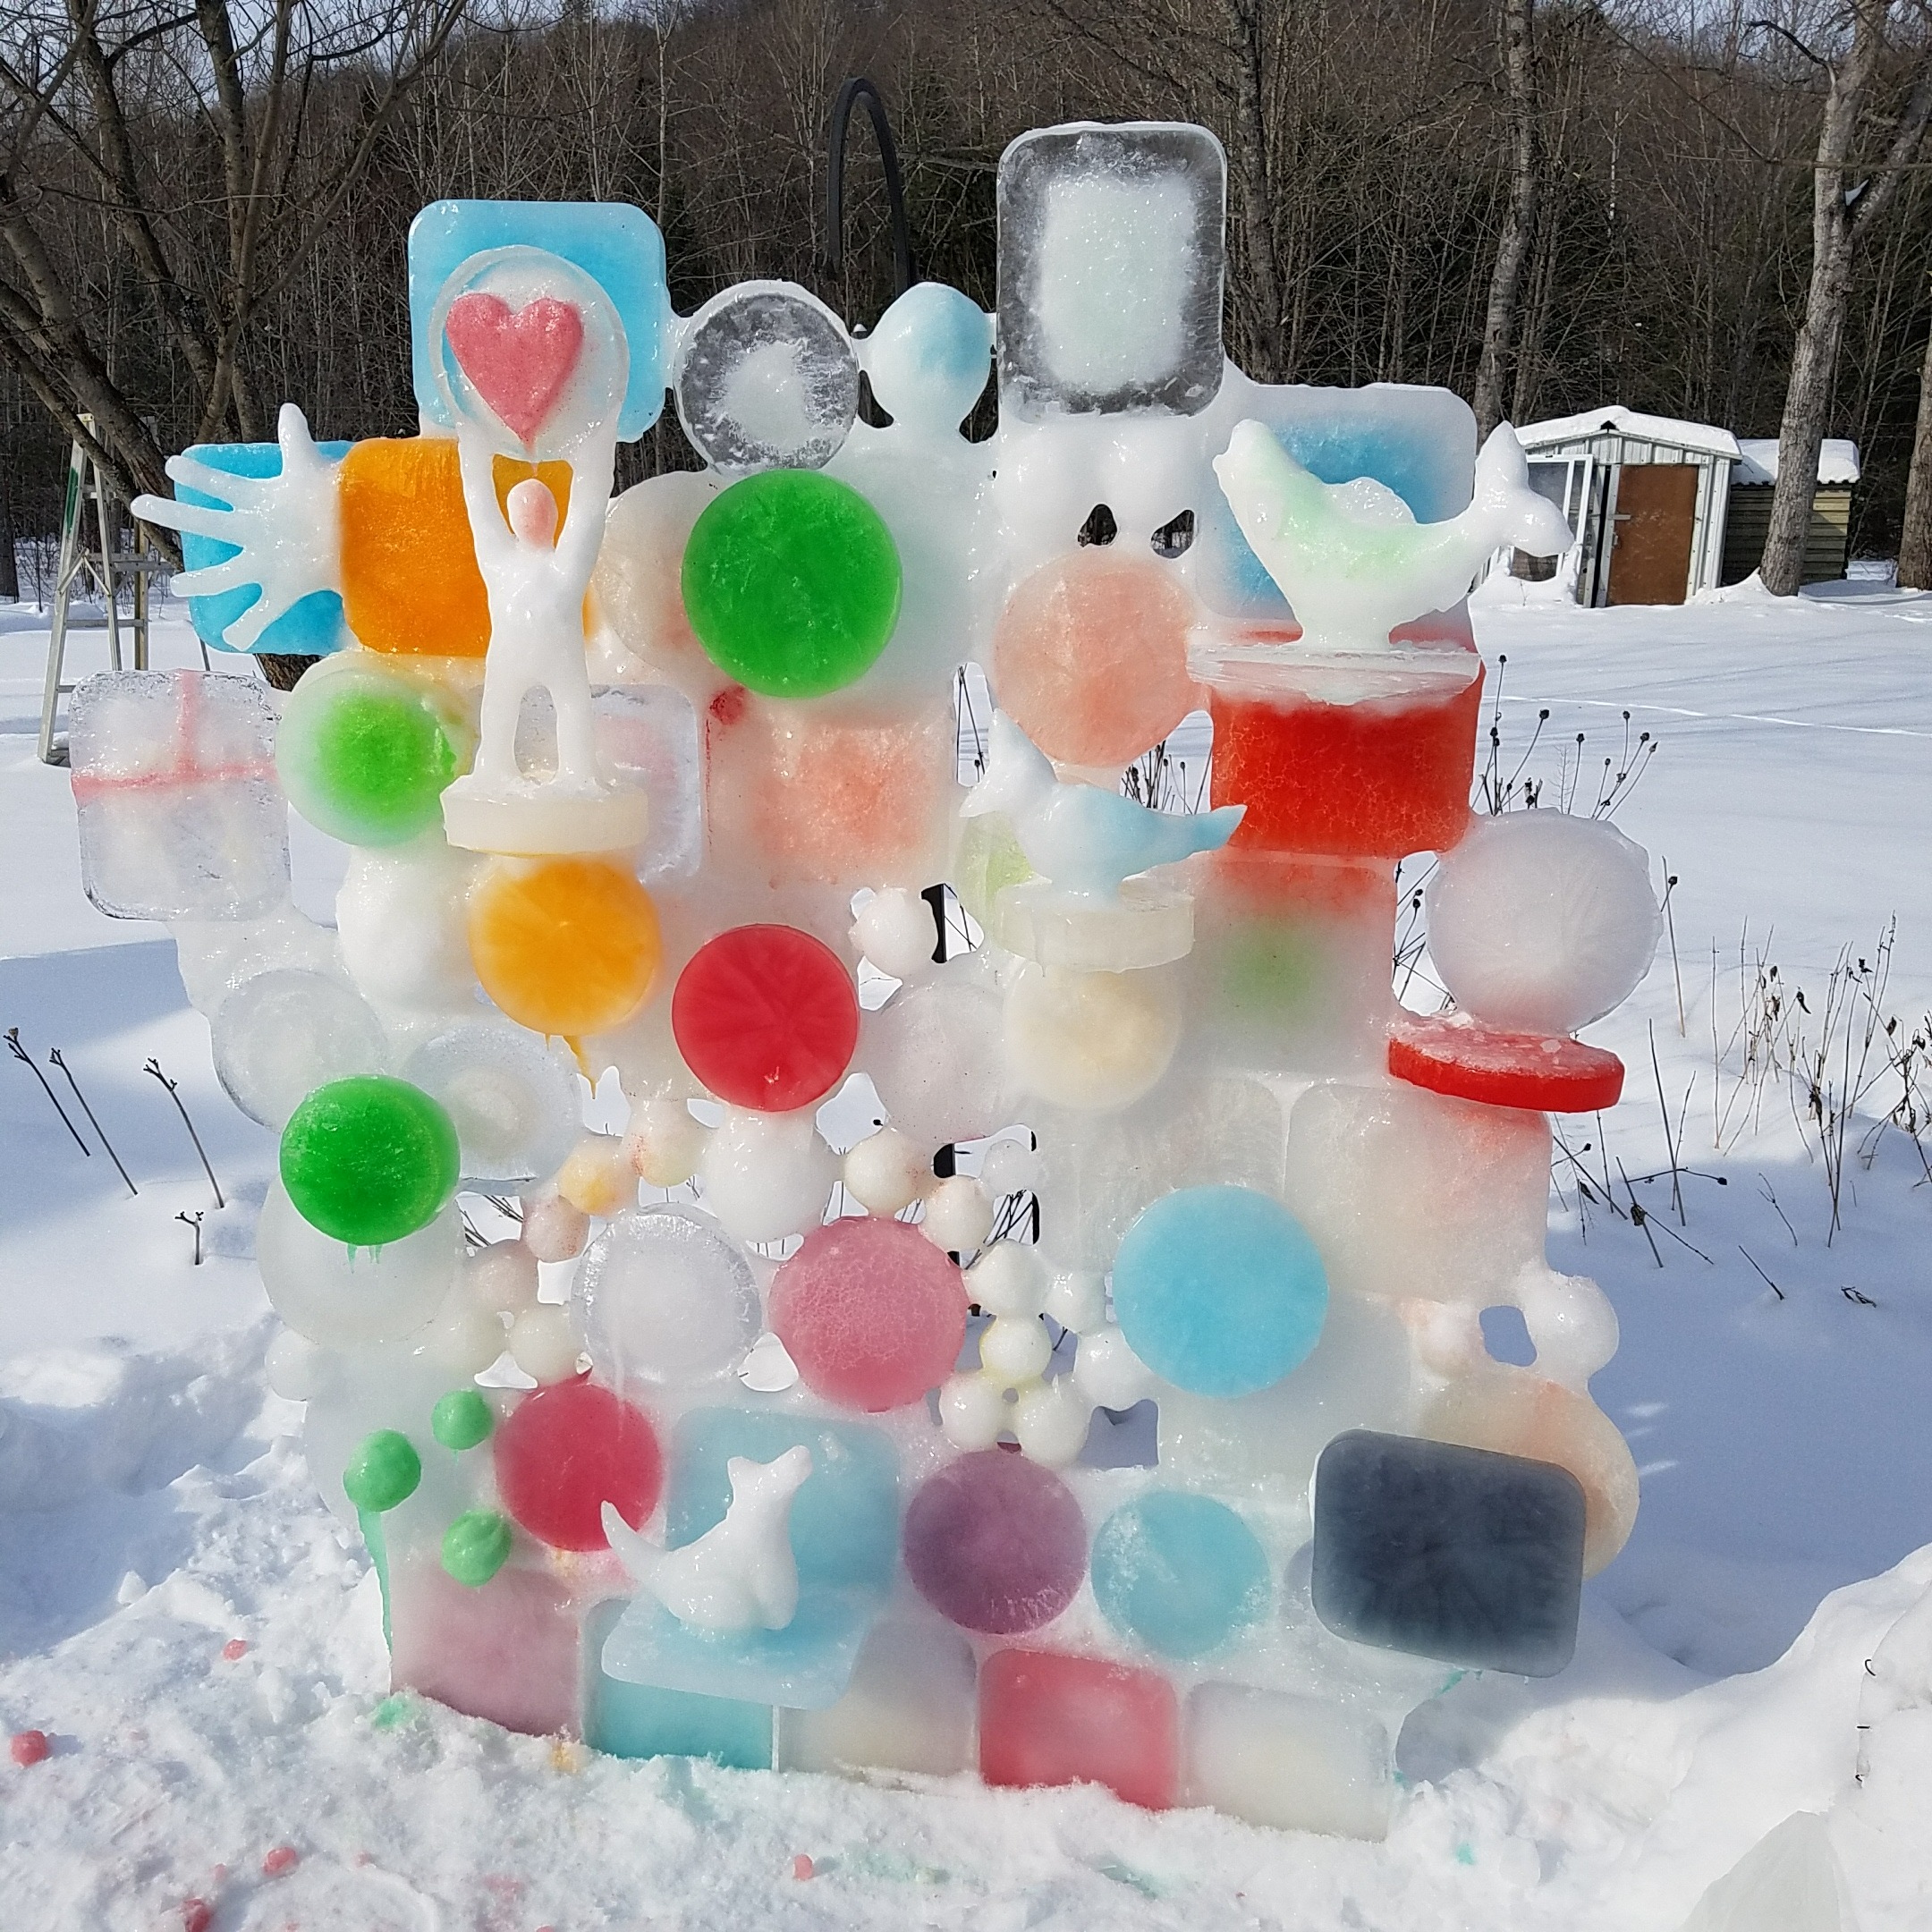 Colourful ice sculpture submission for snow sculpture contest